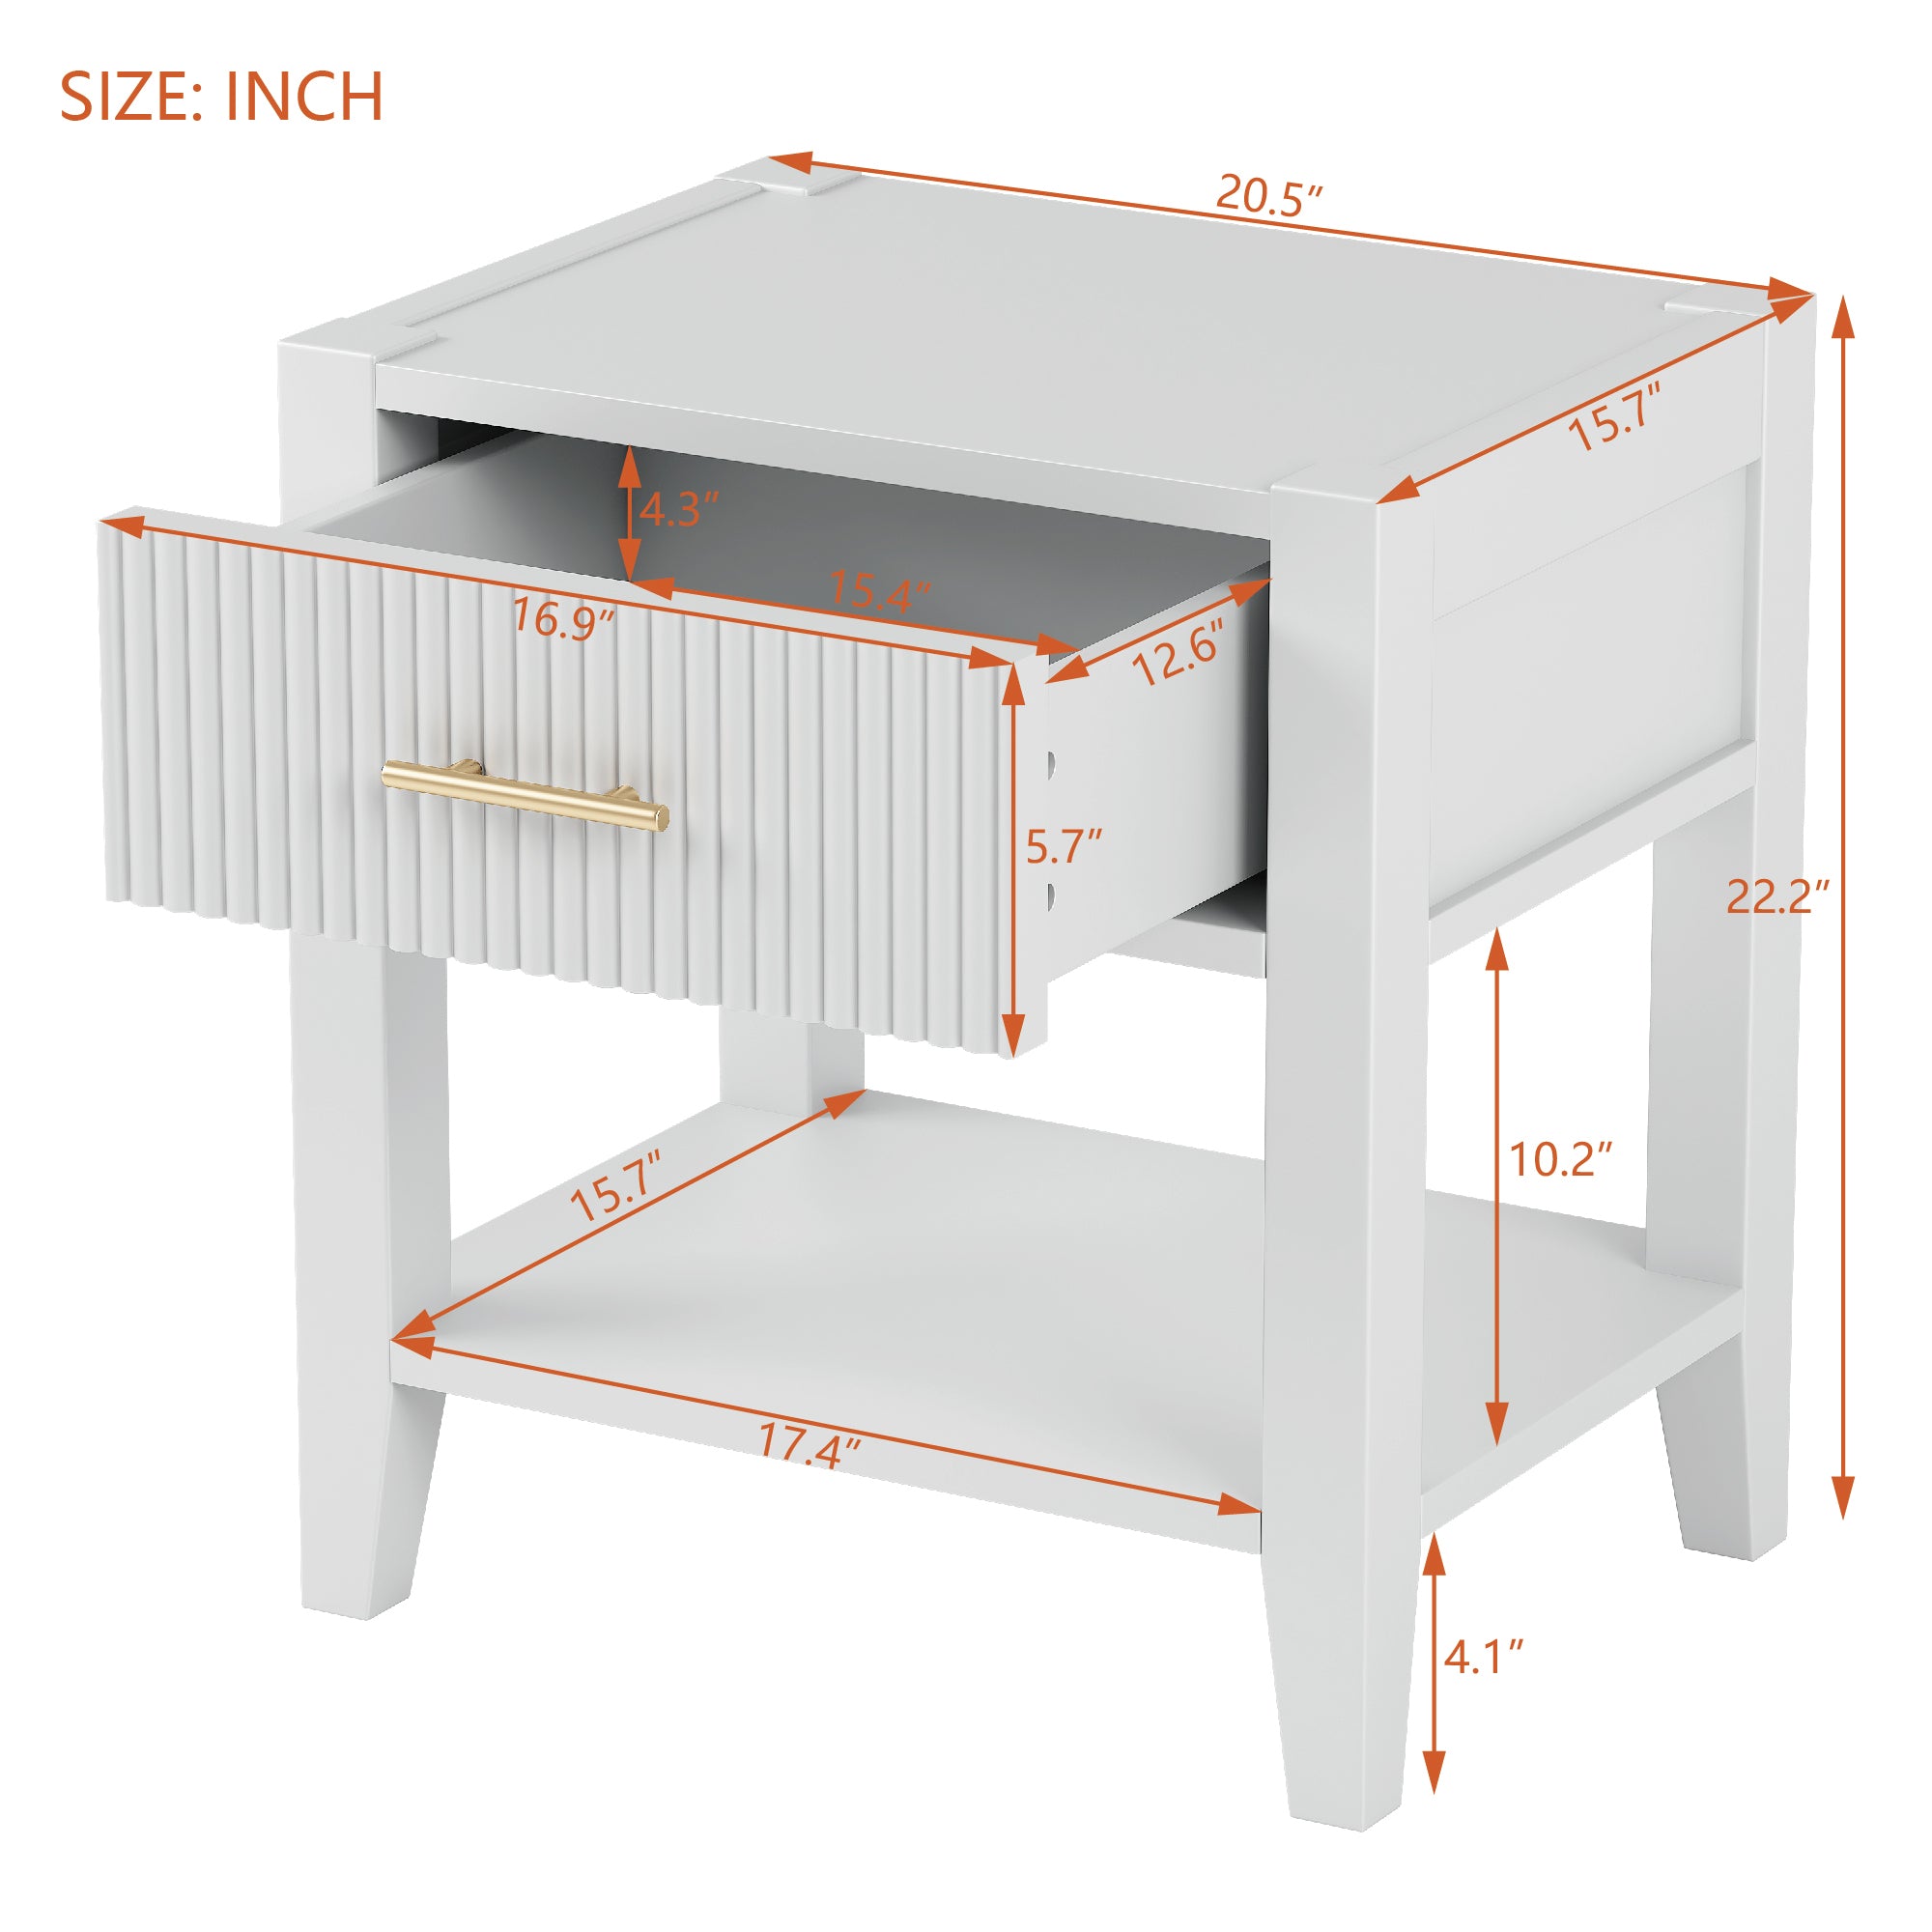 Wooden Nightstand with a Drawer and an Open Storage white-particle board